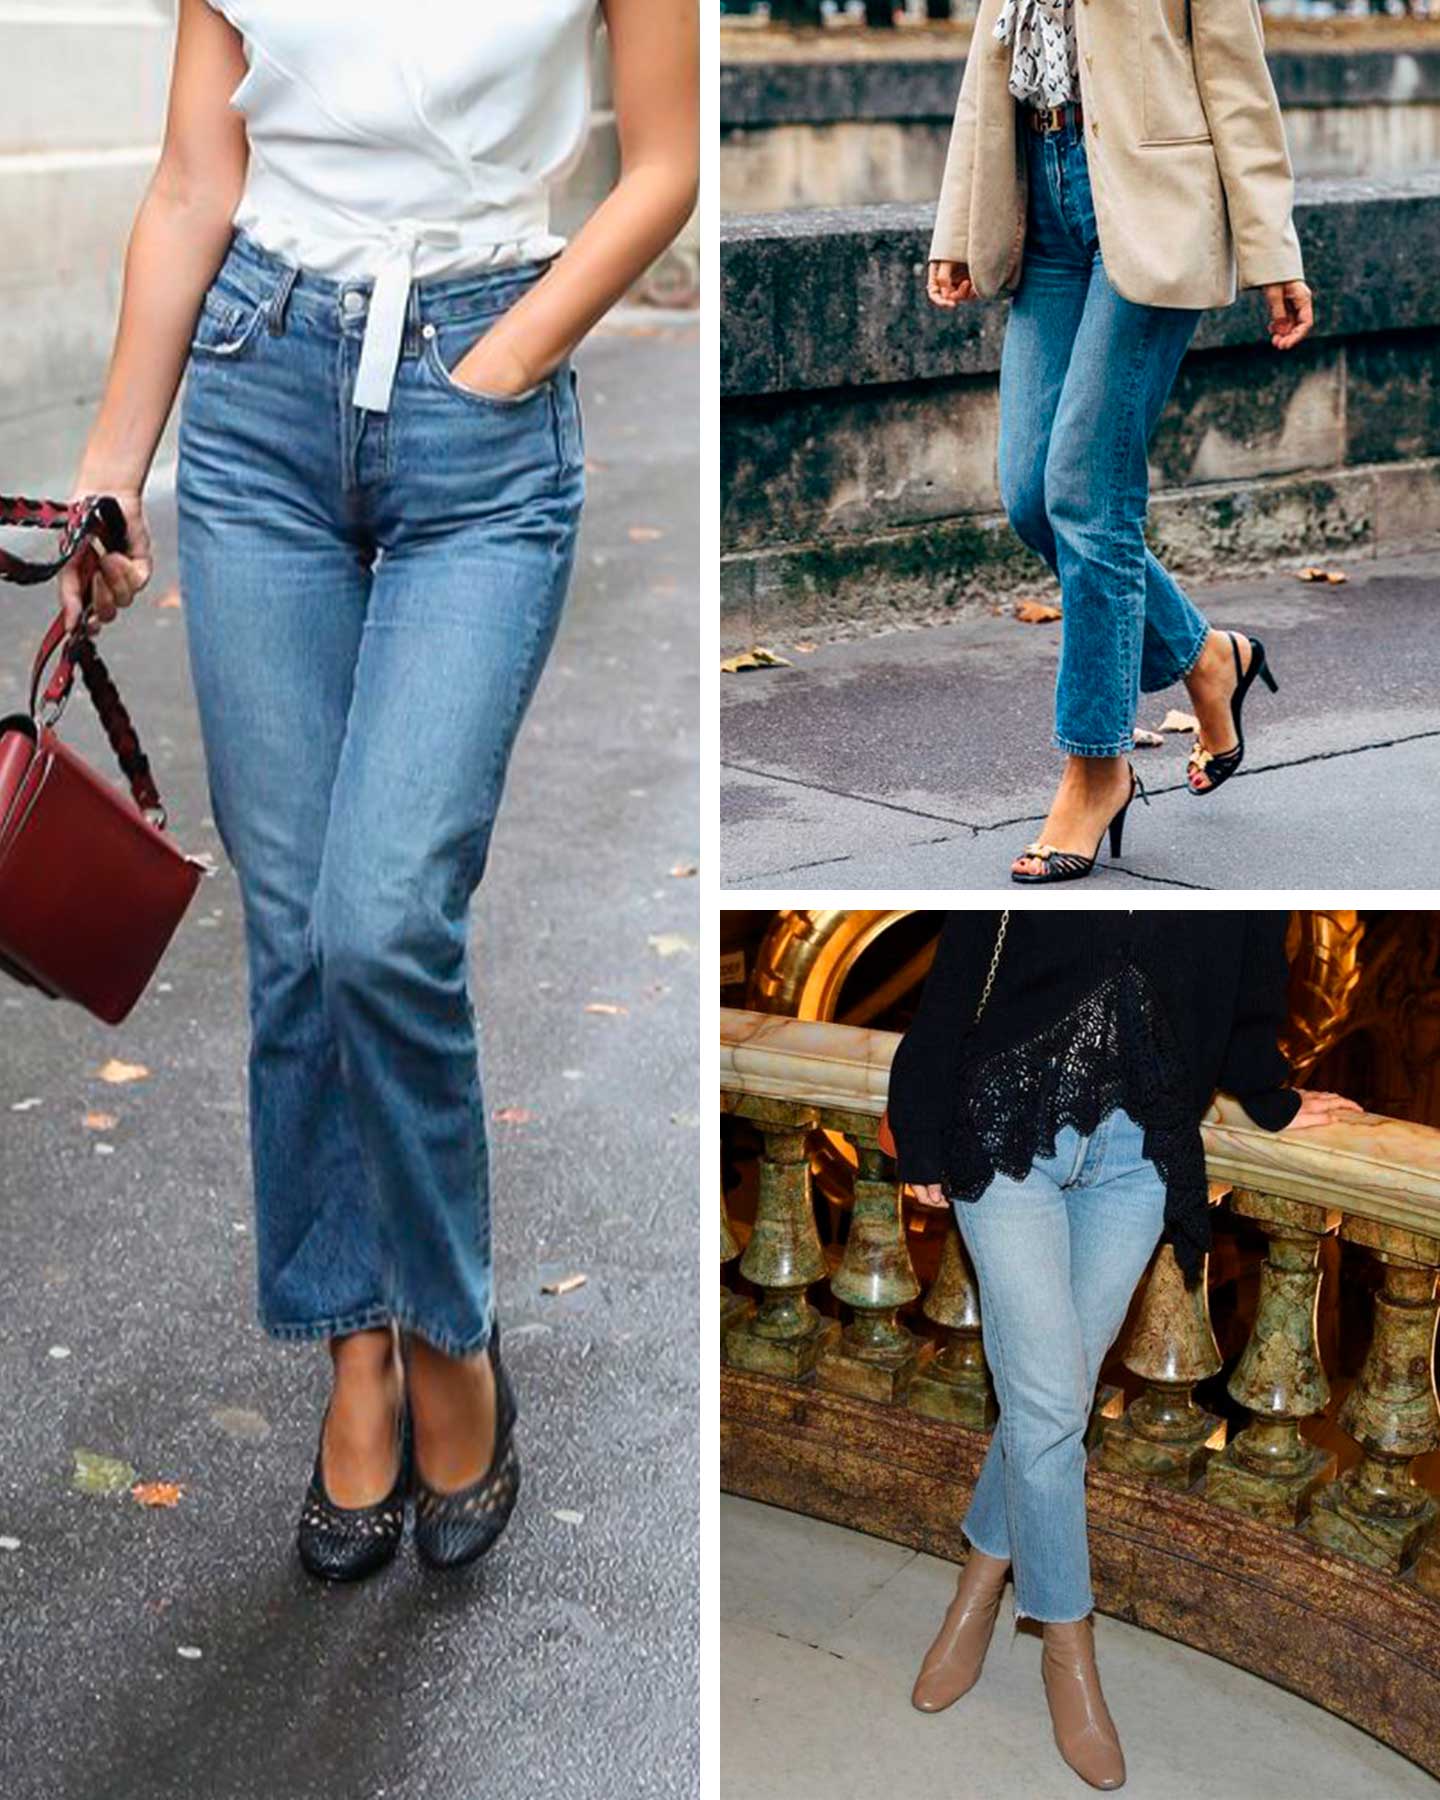 20 Ideas How To Wear Bootcut Jeans The Right Way 2021  How to wear bootcut  jeans, Bootcut jeans outfit, Jeans outfit casual